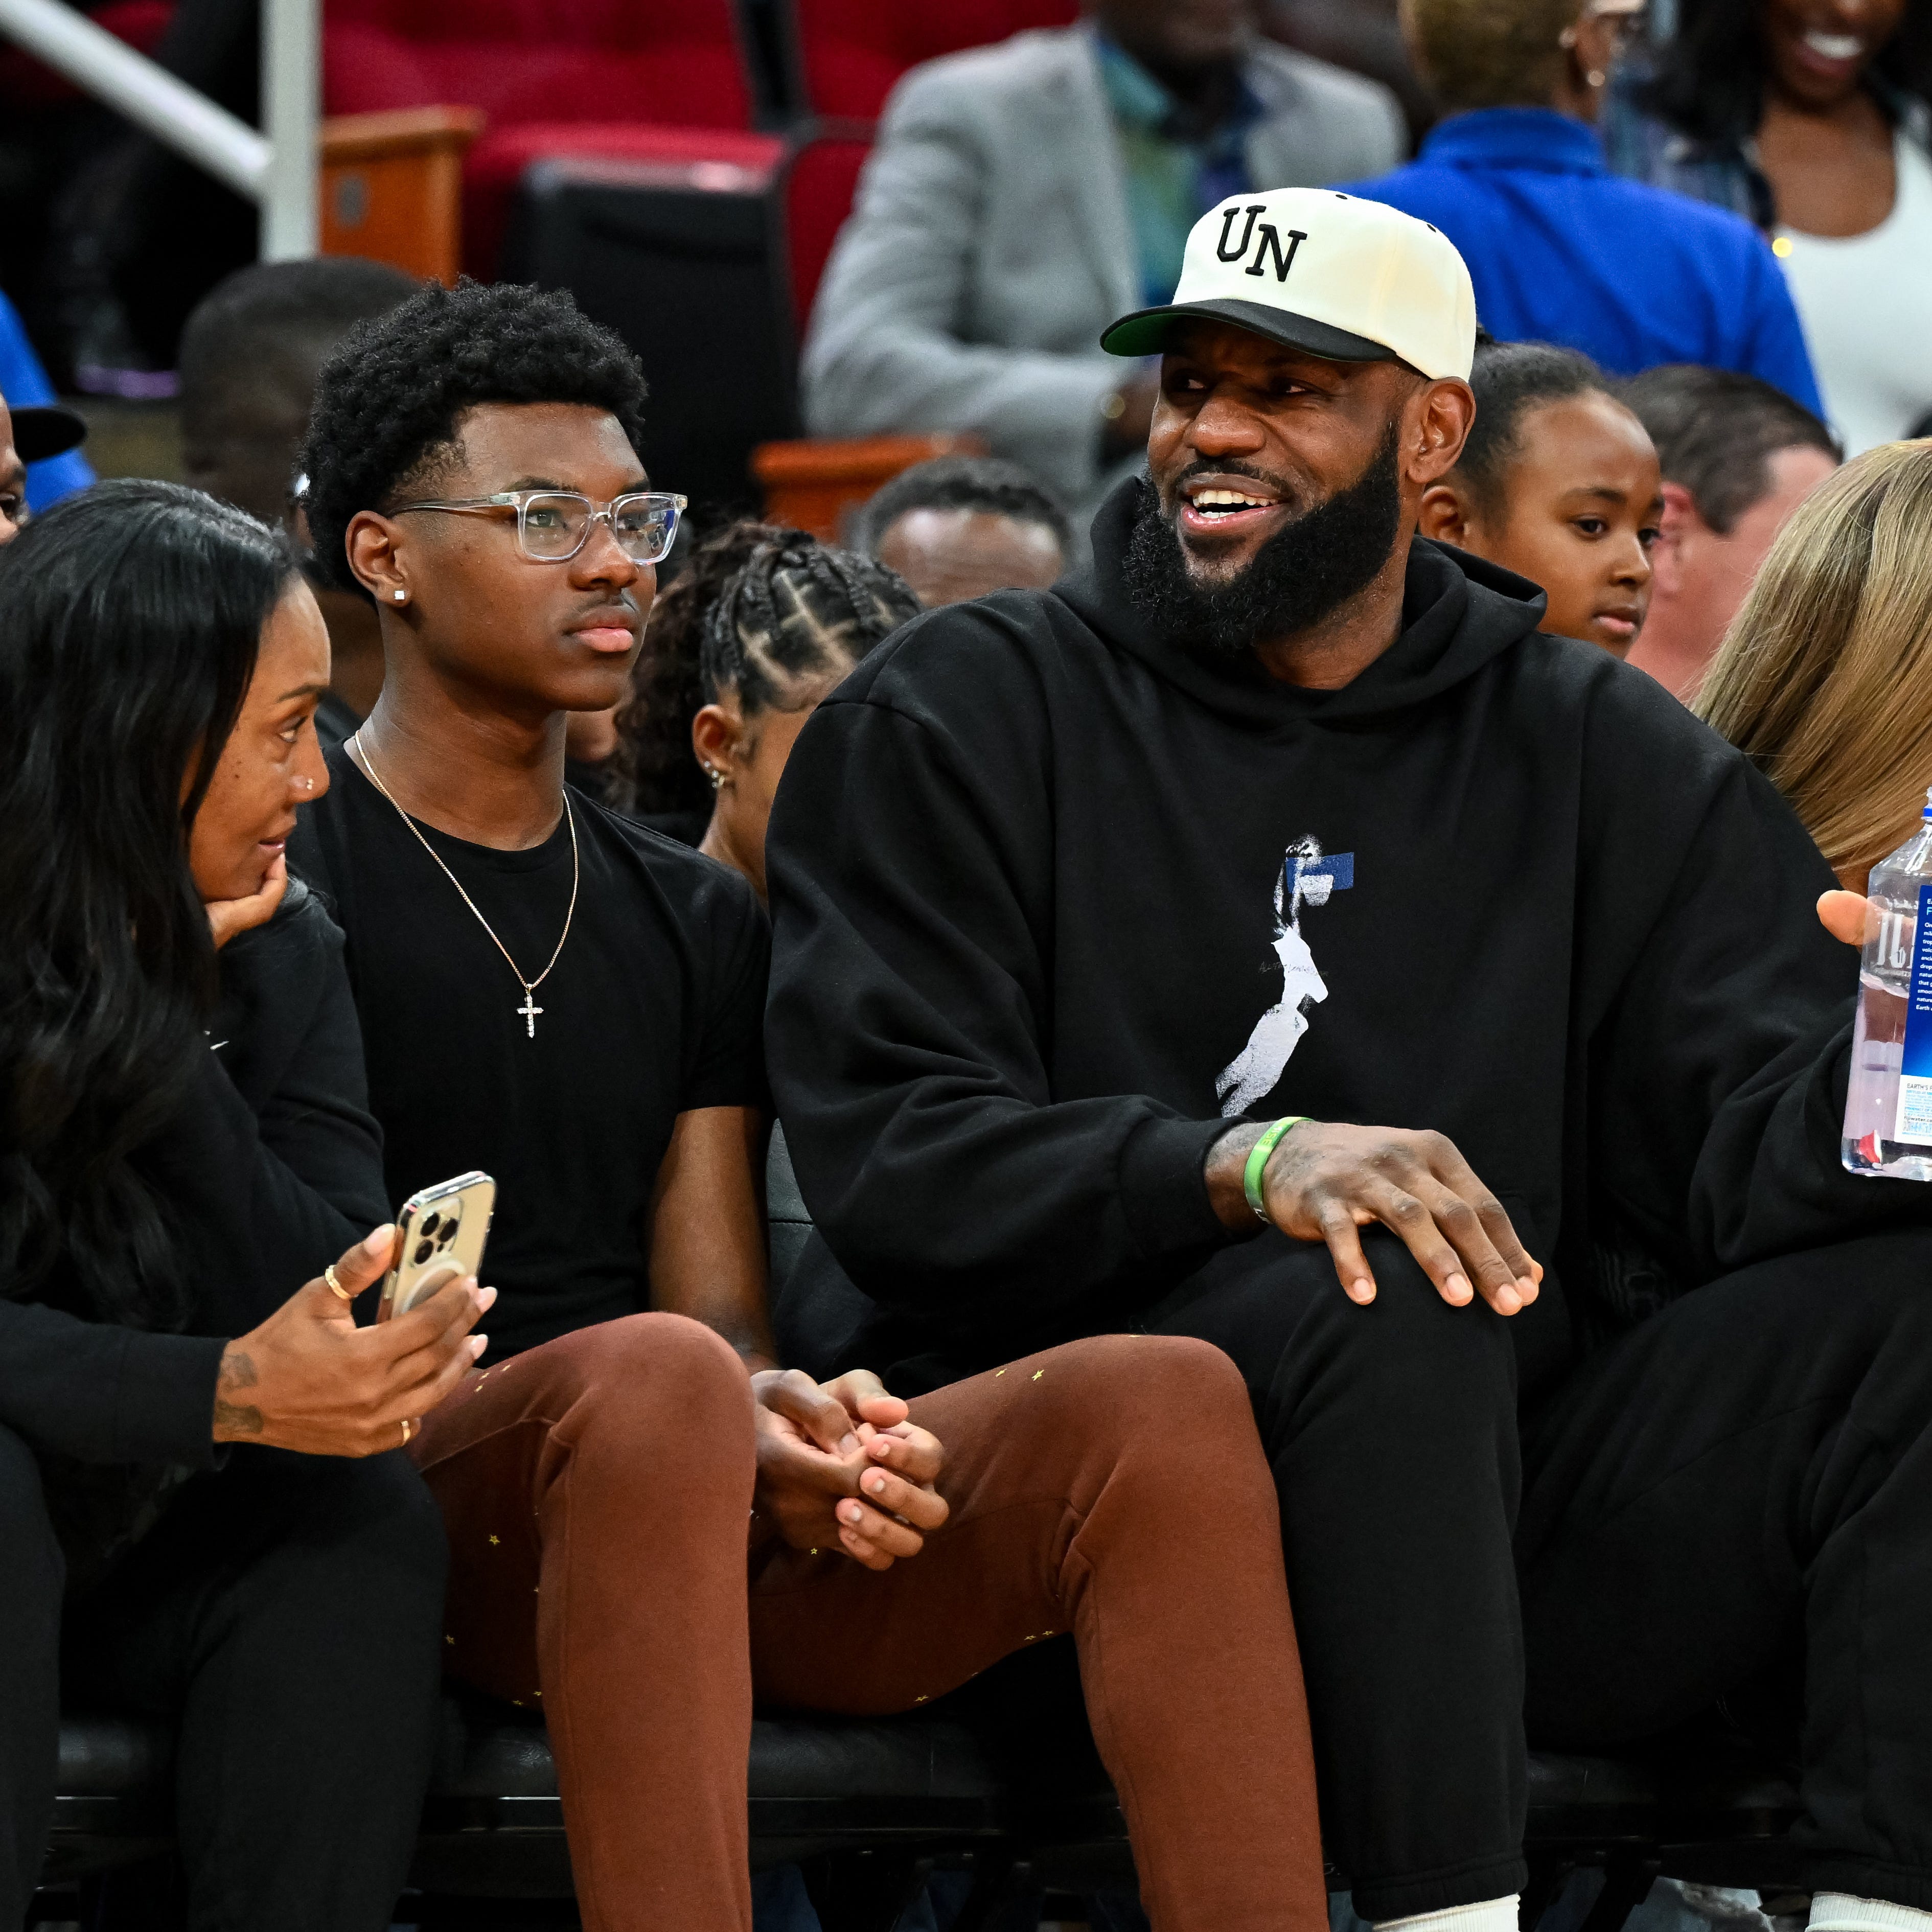 Los Angeles Lakers forward LeBron James sits with his wife Savannah James (right), son Bryce Maximus James (left) and his mother Gloria Marie James (left) court side of the between the McDonald's All American East and the McDonald's All American West at Toyota Center on Mar 28, 2023.